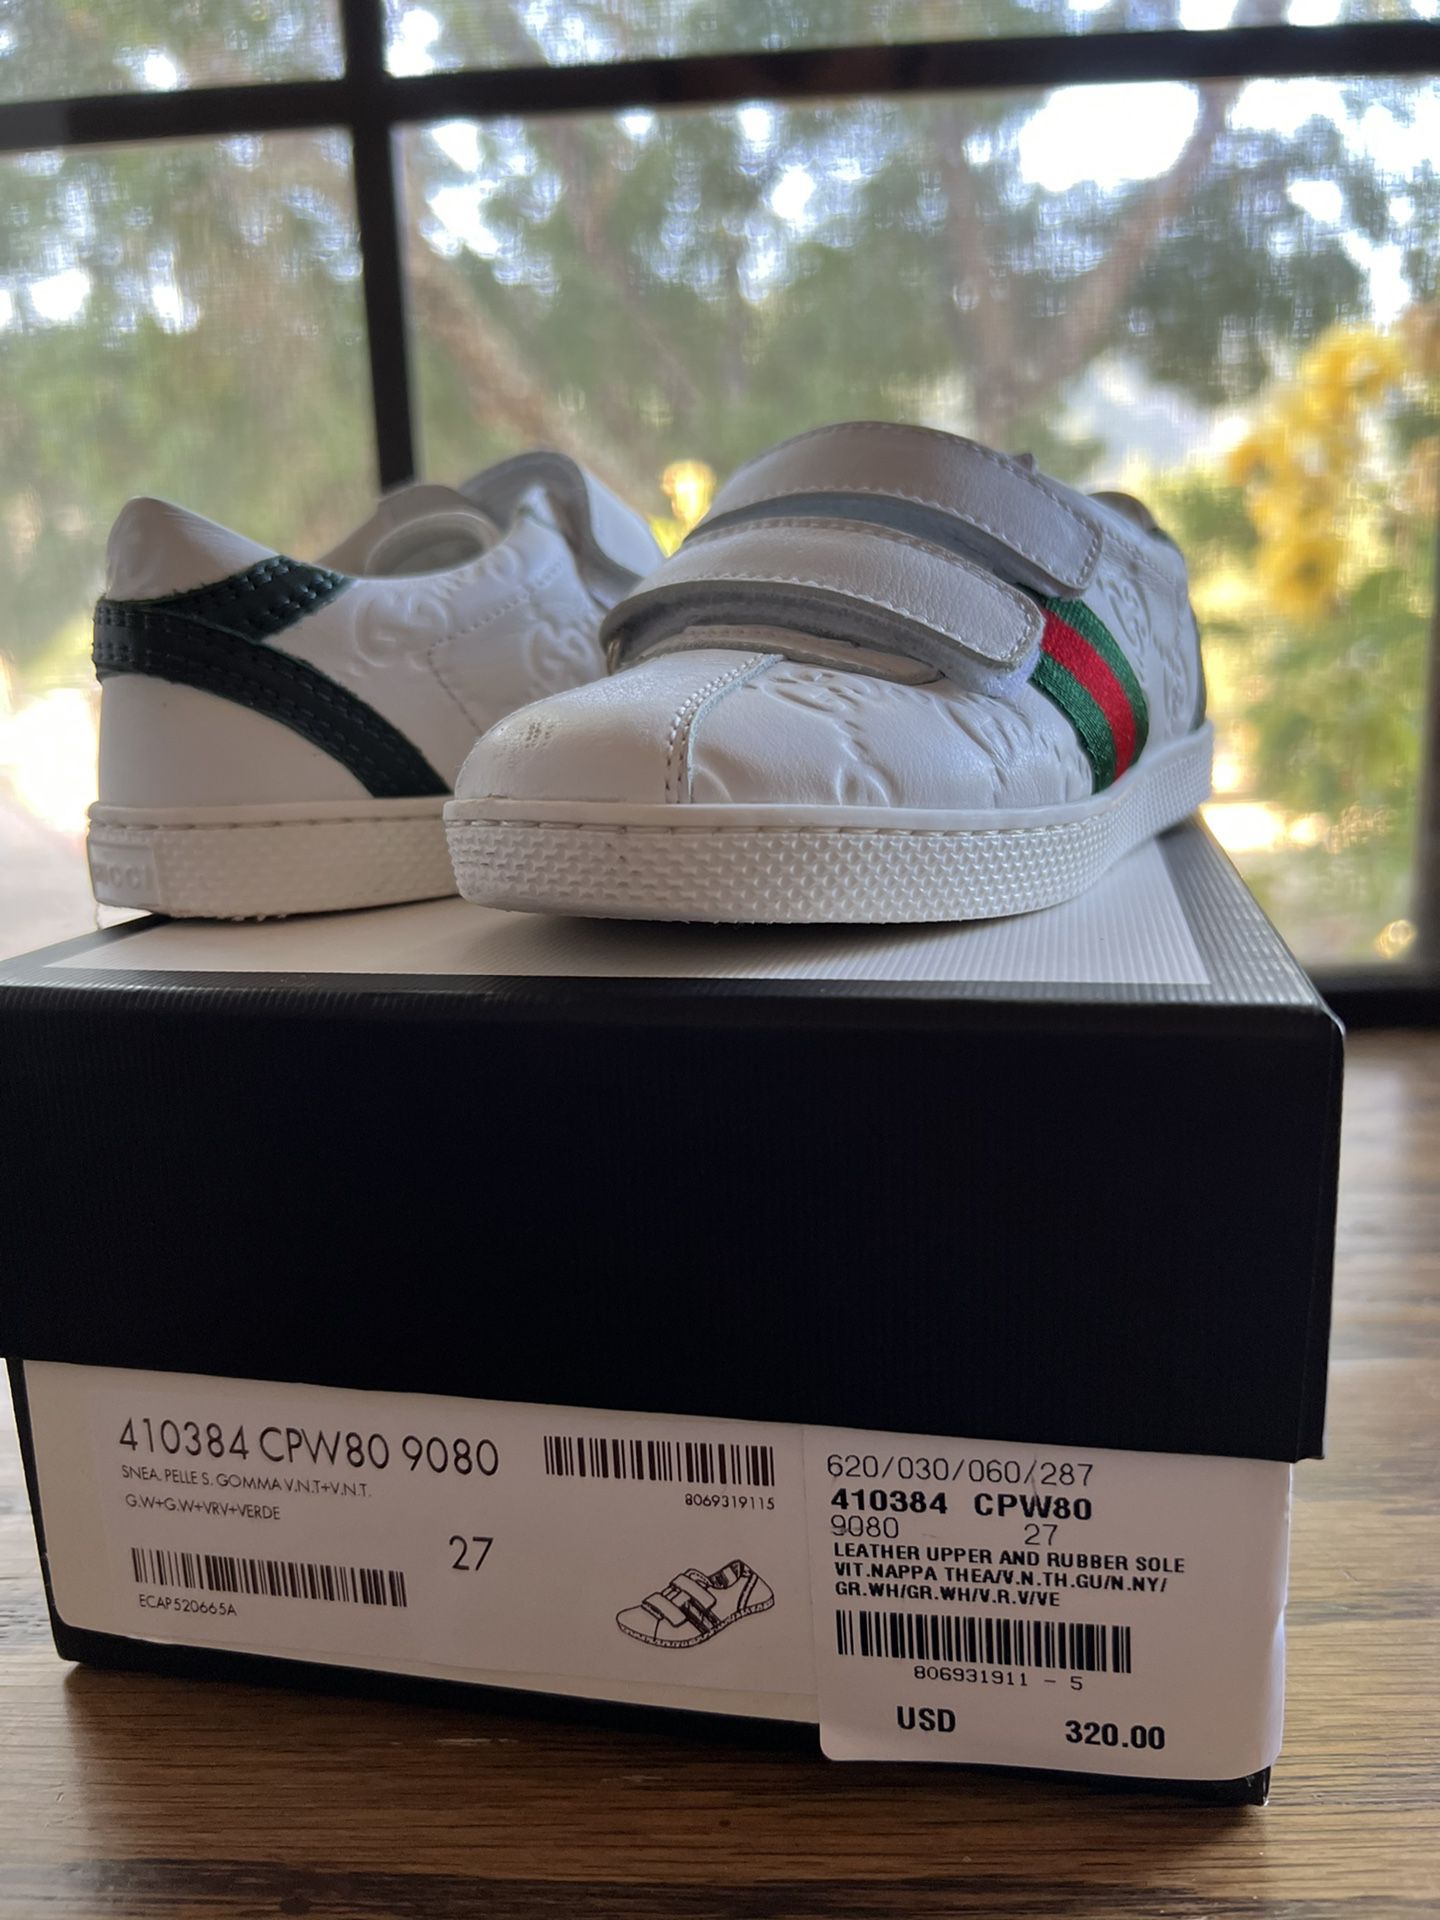 sindsyg Excel Sovesal Authentic GUCCI KIDS VELCRO FASTENING SNEAKERS for Sale in Gilroy, CA -  OfferUp